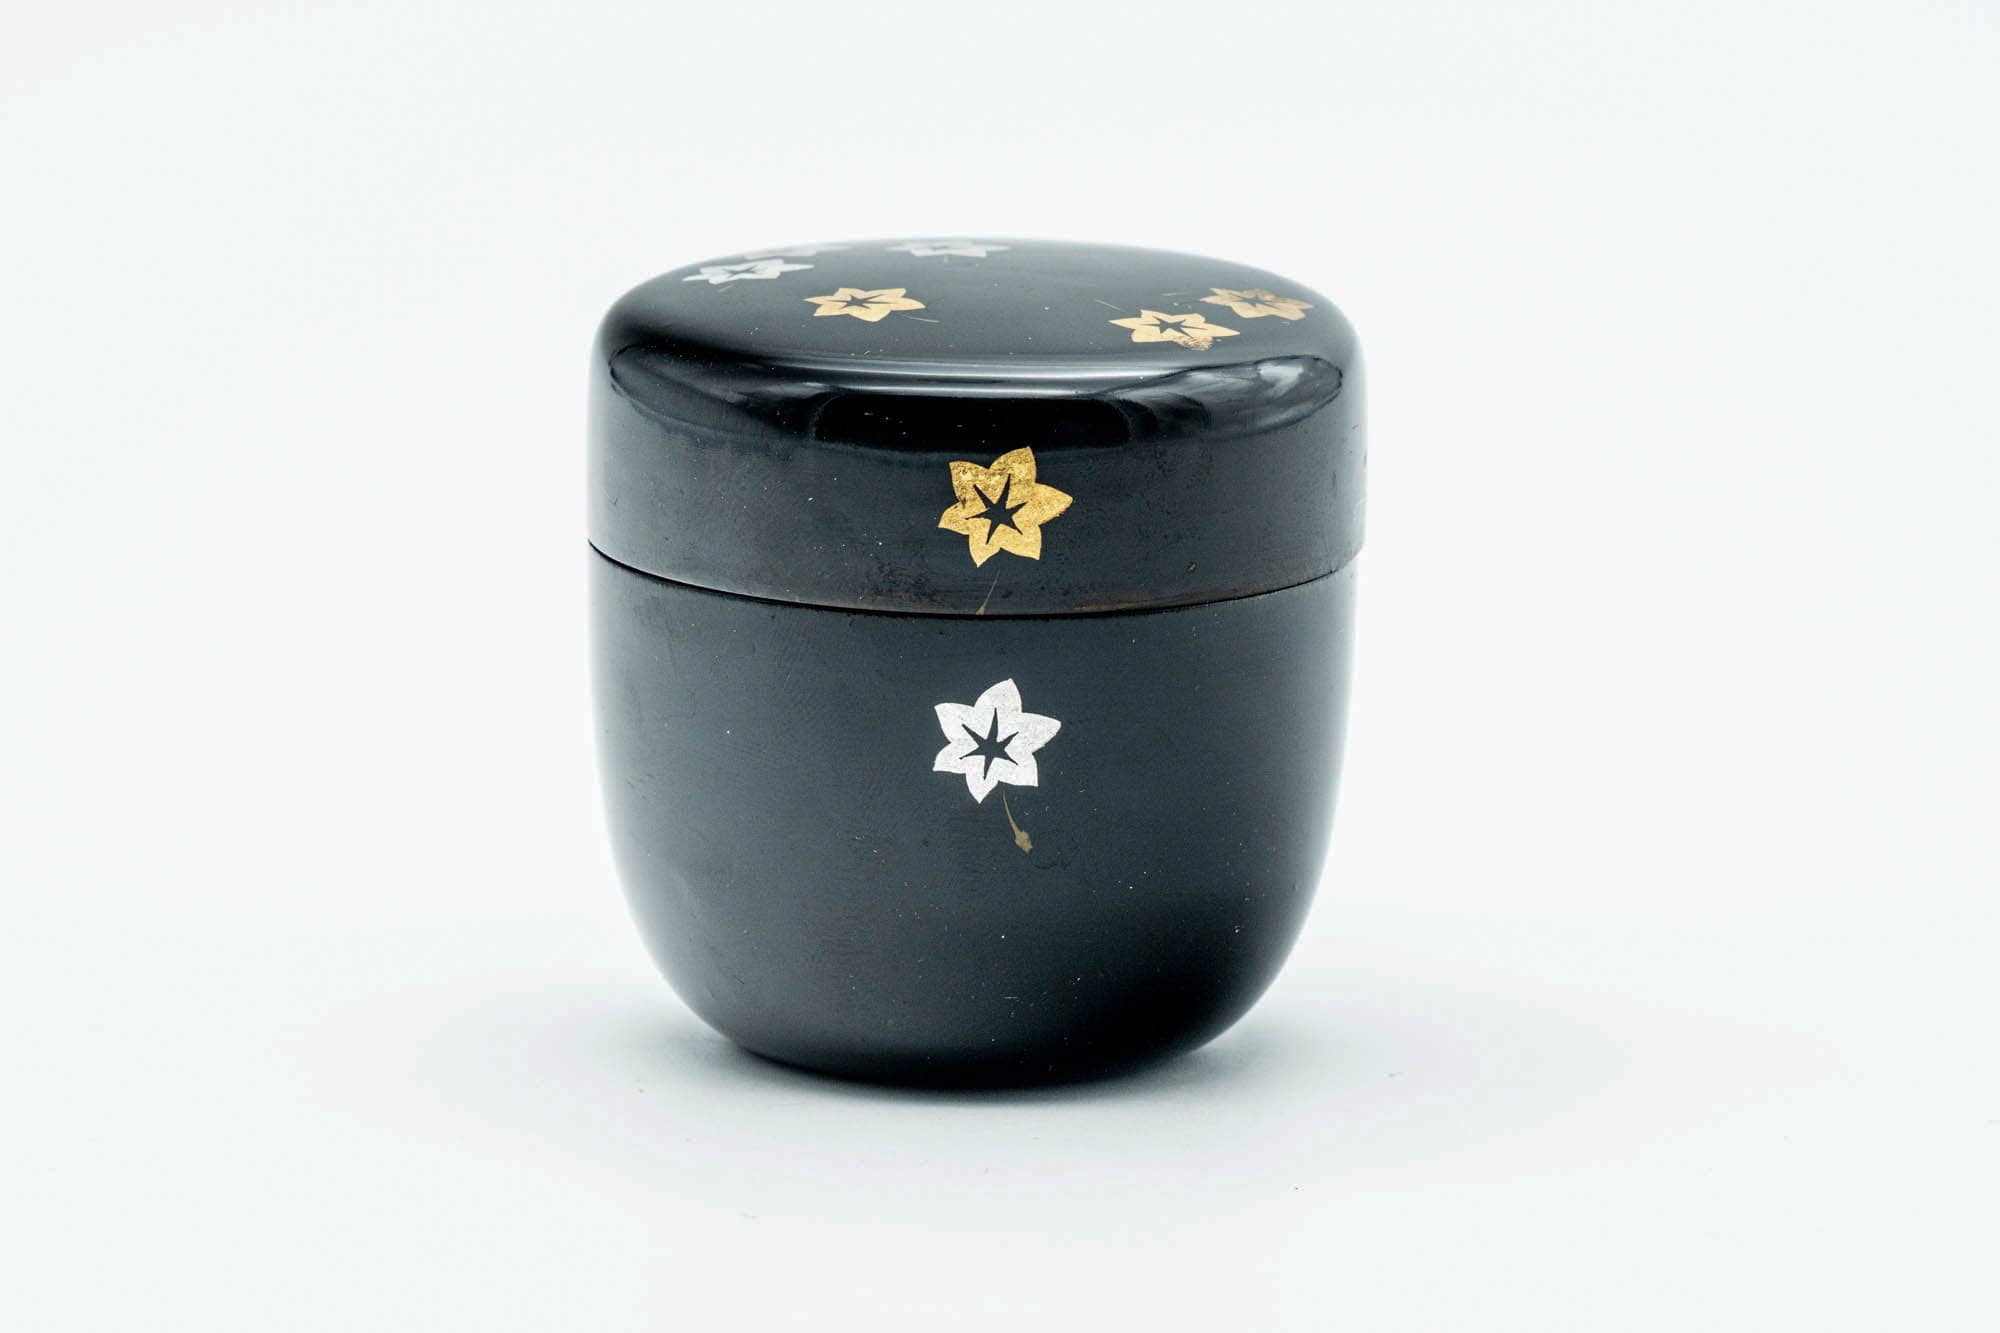 Japanese Natsume - 水仙 Daffodil Suisen Black Lacquered Matcha Tea Caddy - 65ml